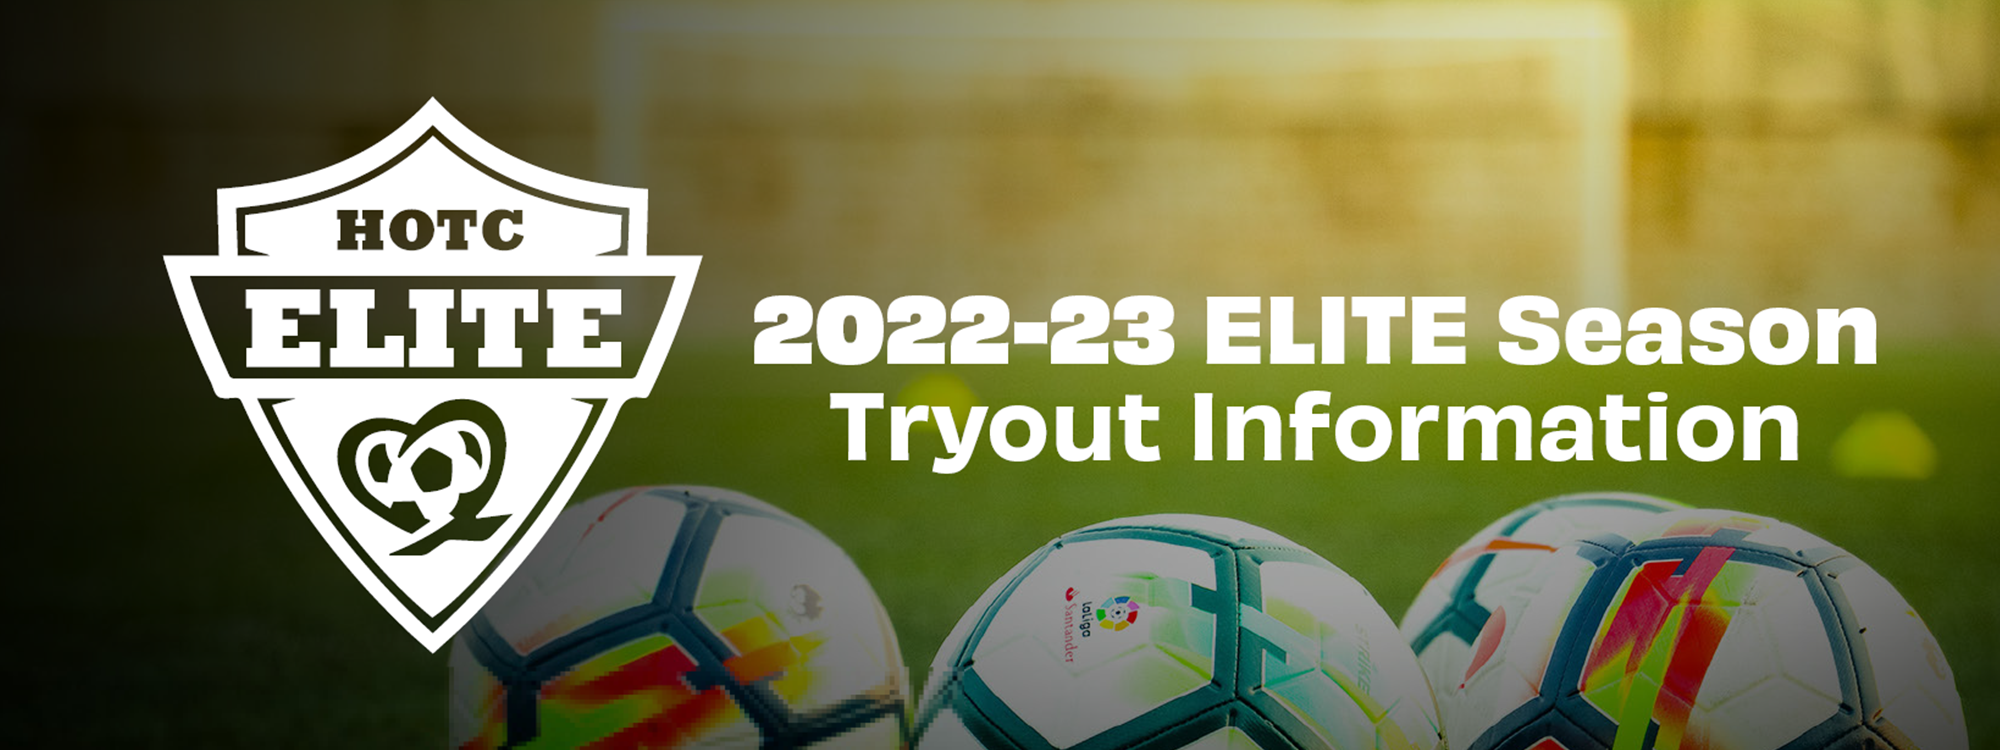 Tryout info banner website